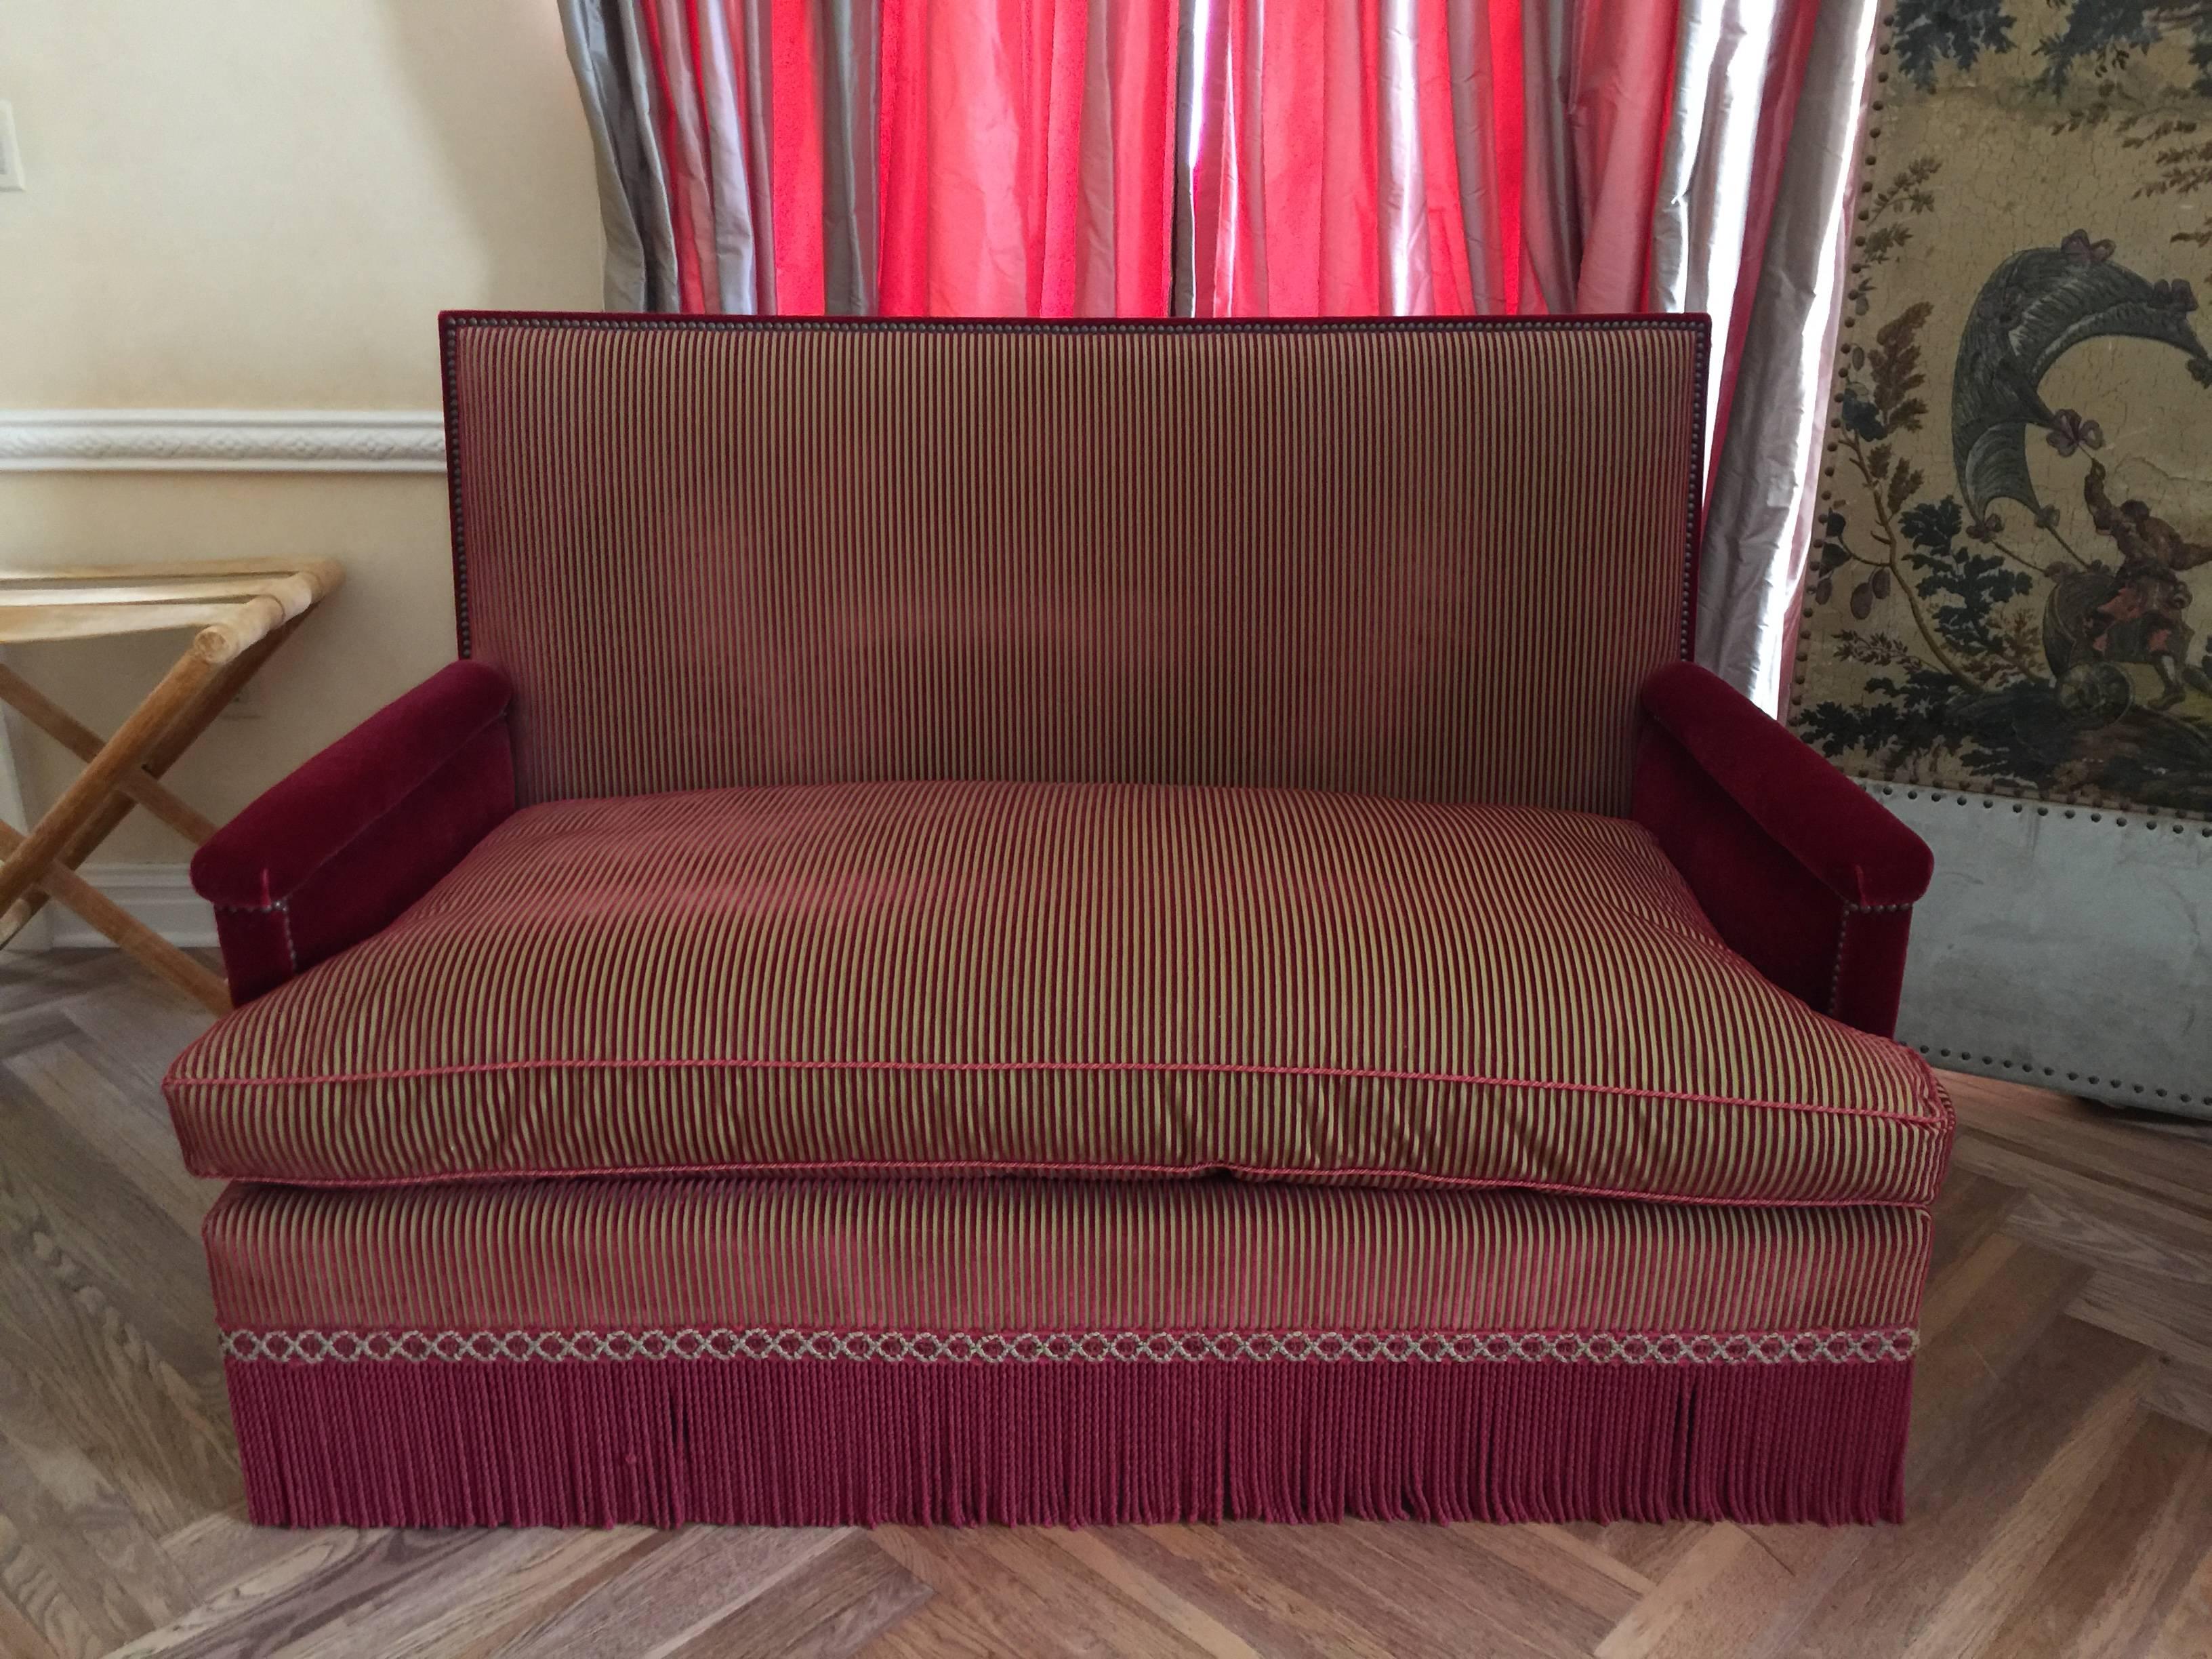 The upholstery with studs, gimp and fringe, with velvet back and sides.